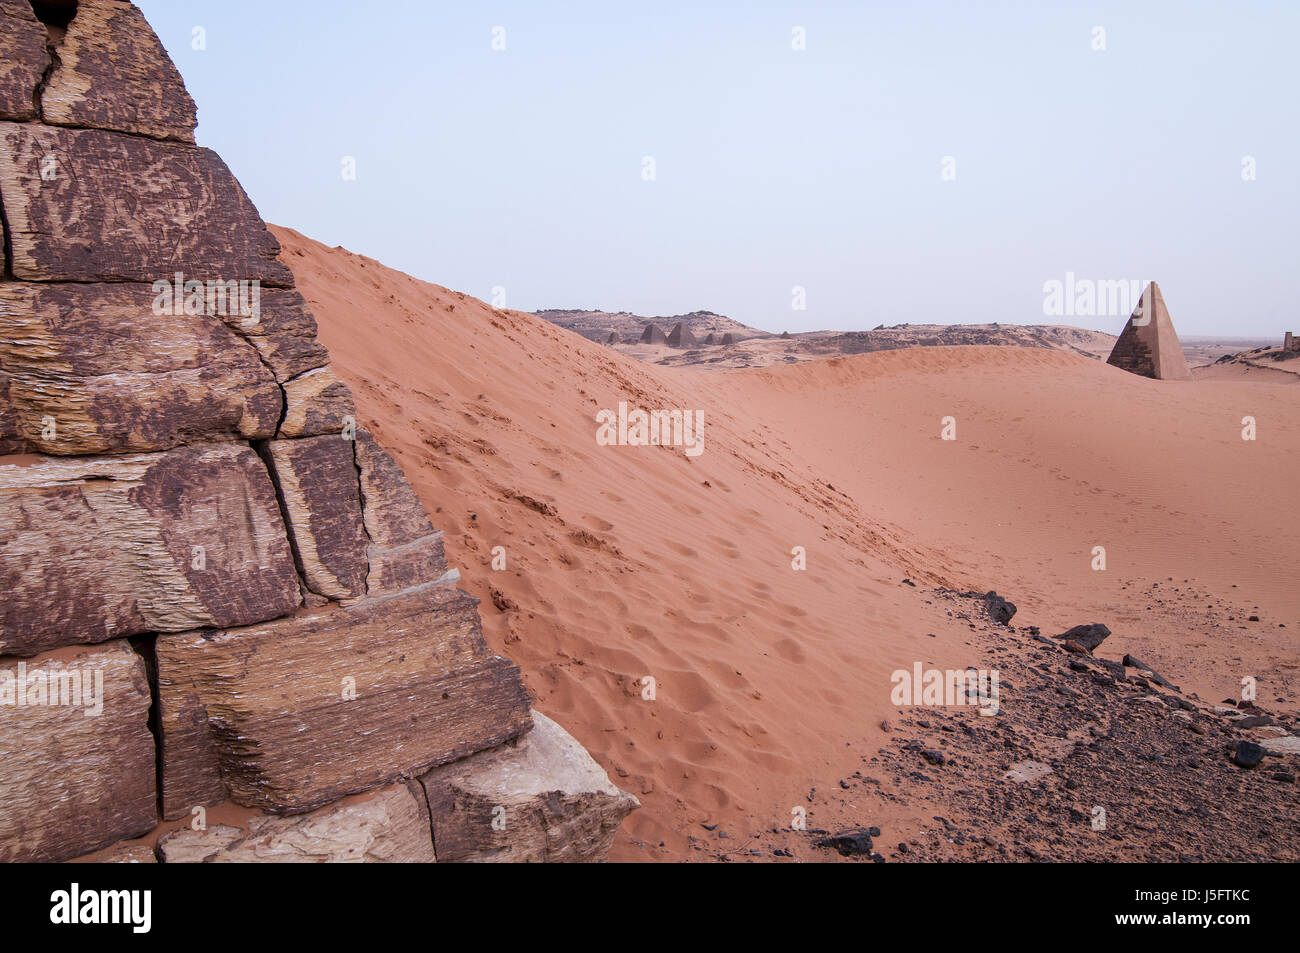 SUDAN, MEROE: Meroë (Meroitic: Medewi or Bedewi) is an ancient city on the east bank of the Nile about 6 km north-east of the Kabushiya station near S Stock Photo